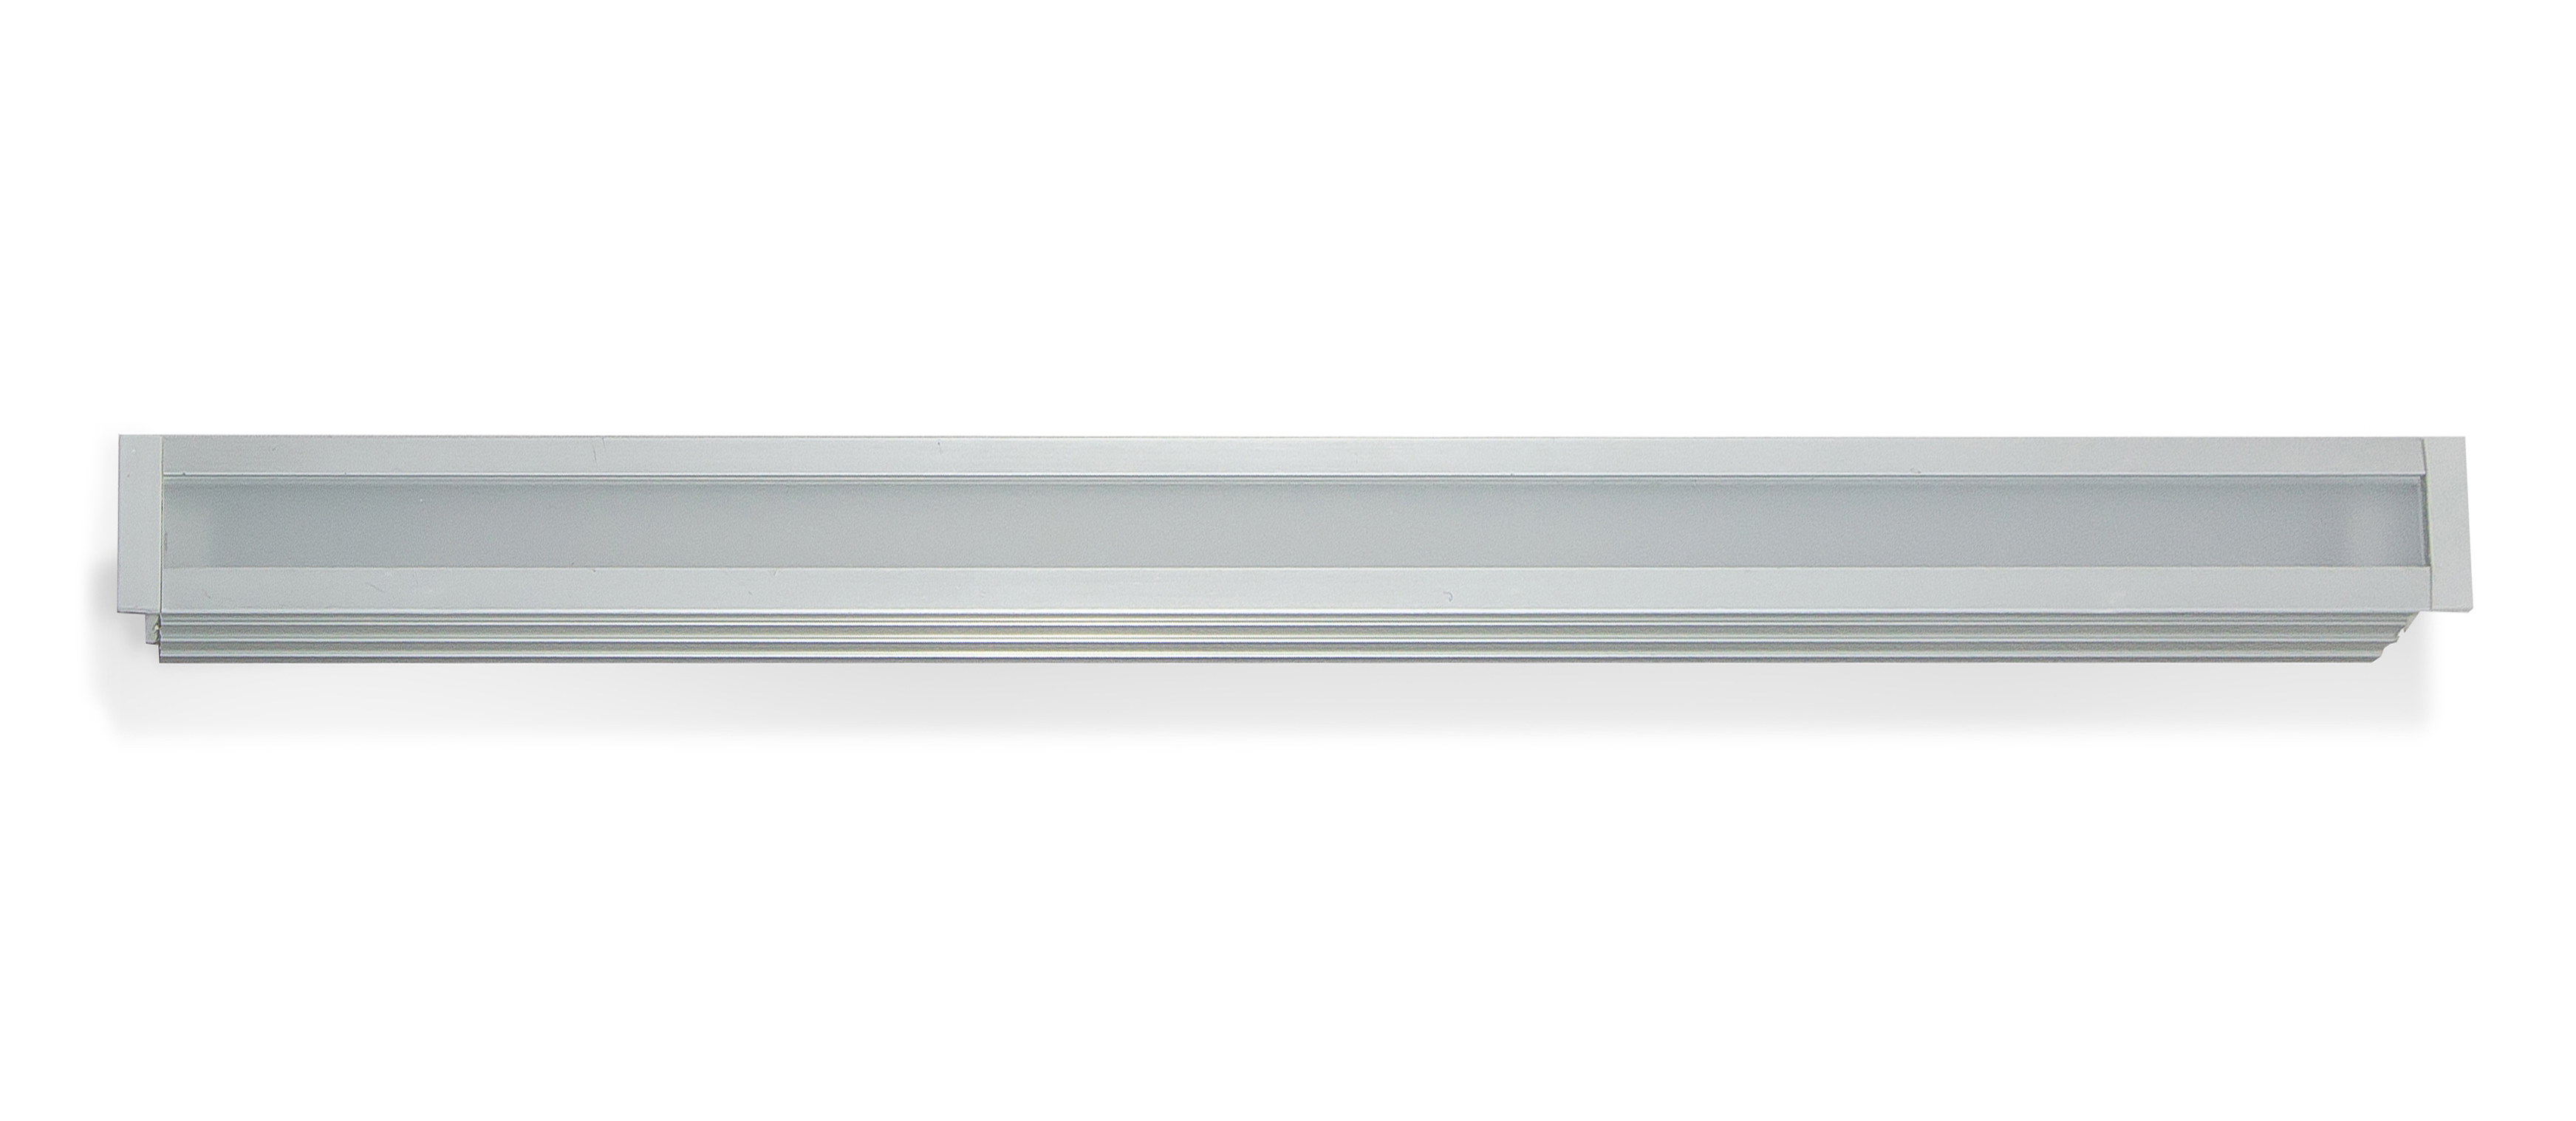 Led lay-line 500 mm 14,4 w 4000k arg. grigio touch